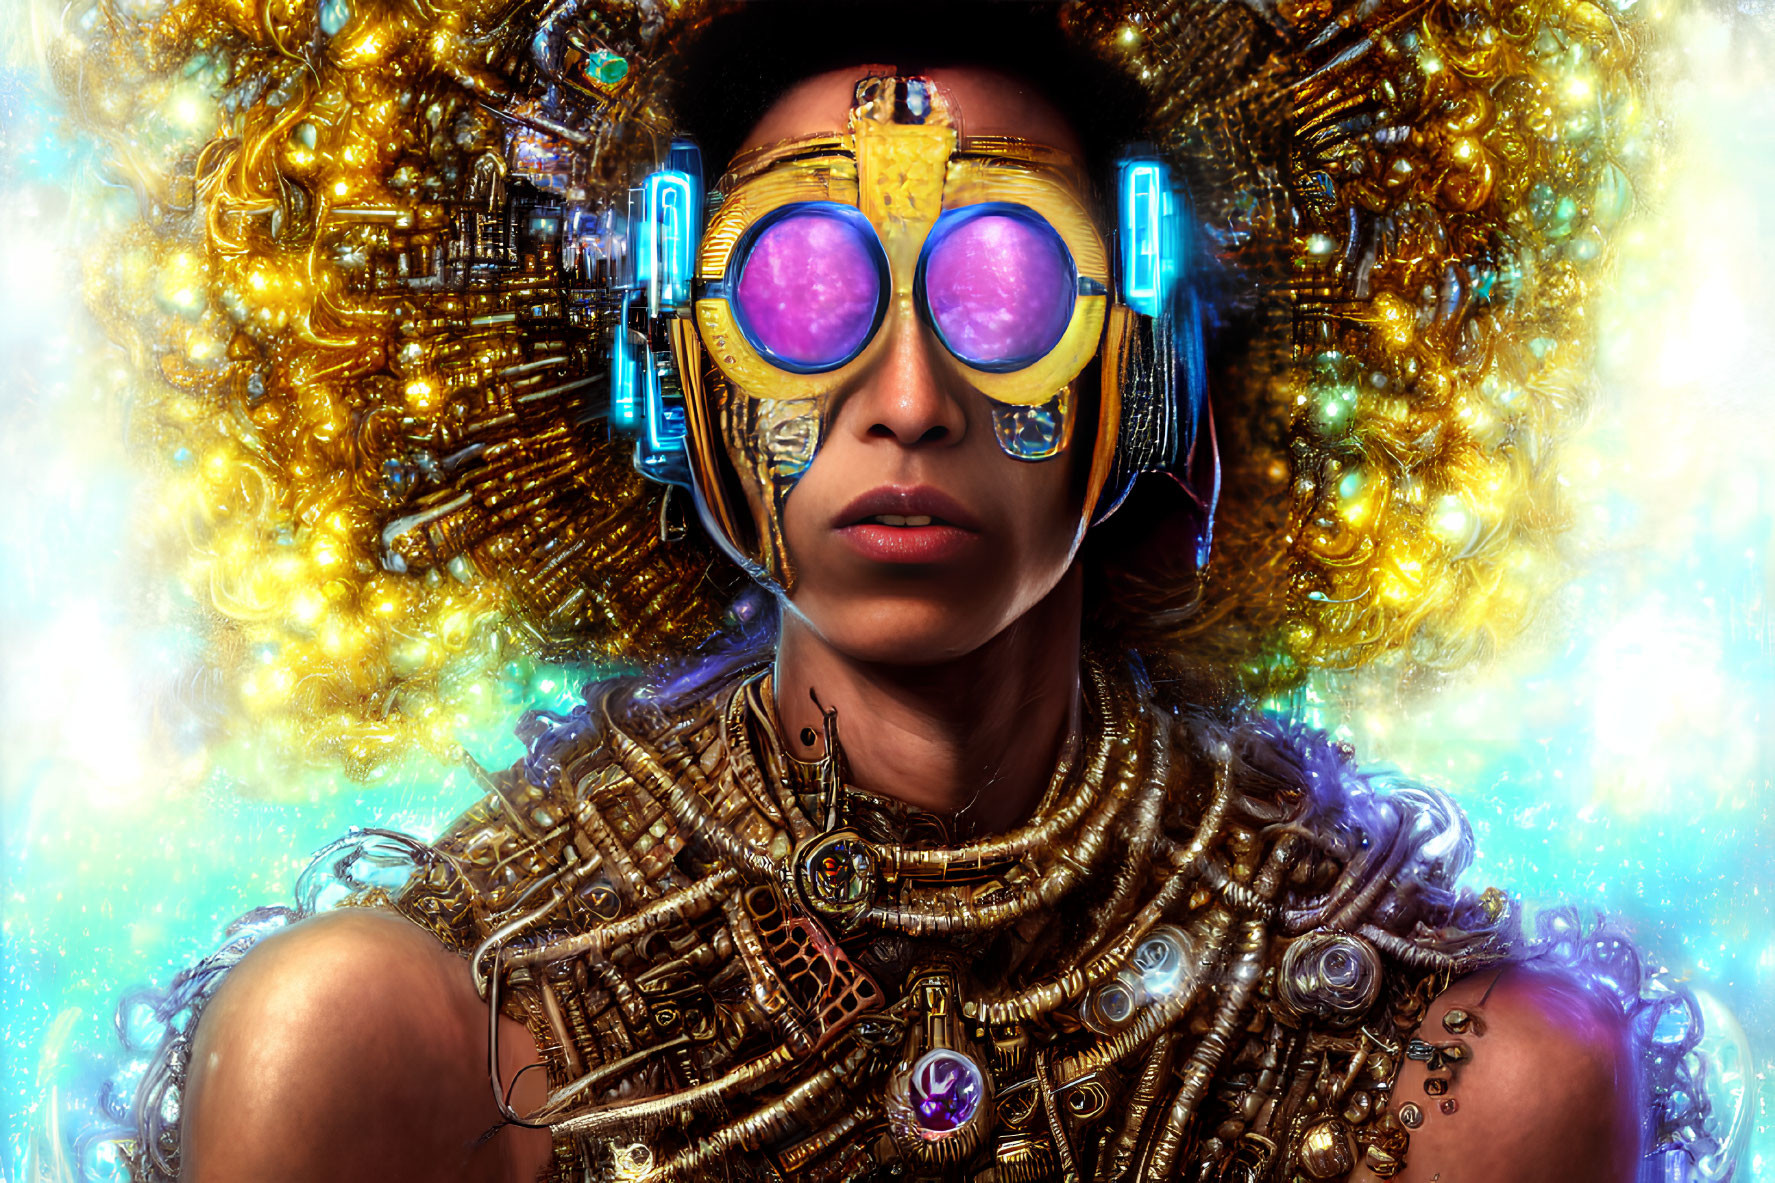 Futuristic goggles and golden jewelry with intricate mechanical detail on luminous backdrop